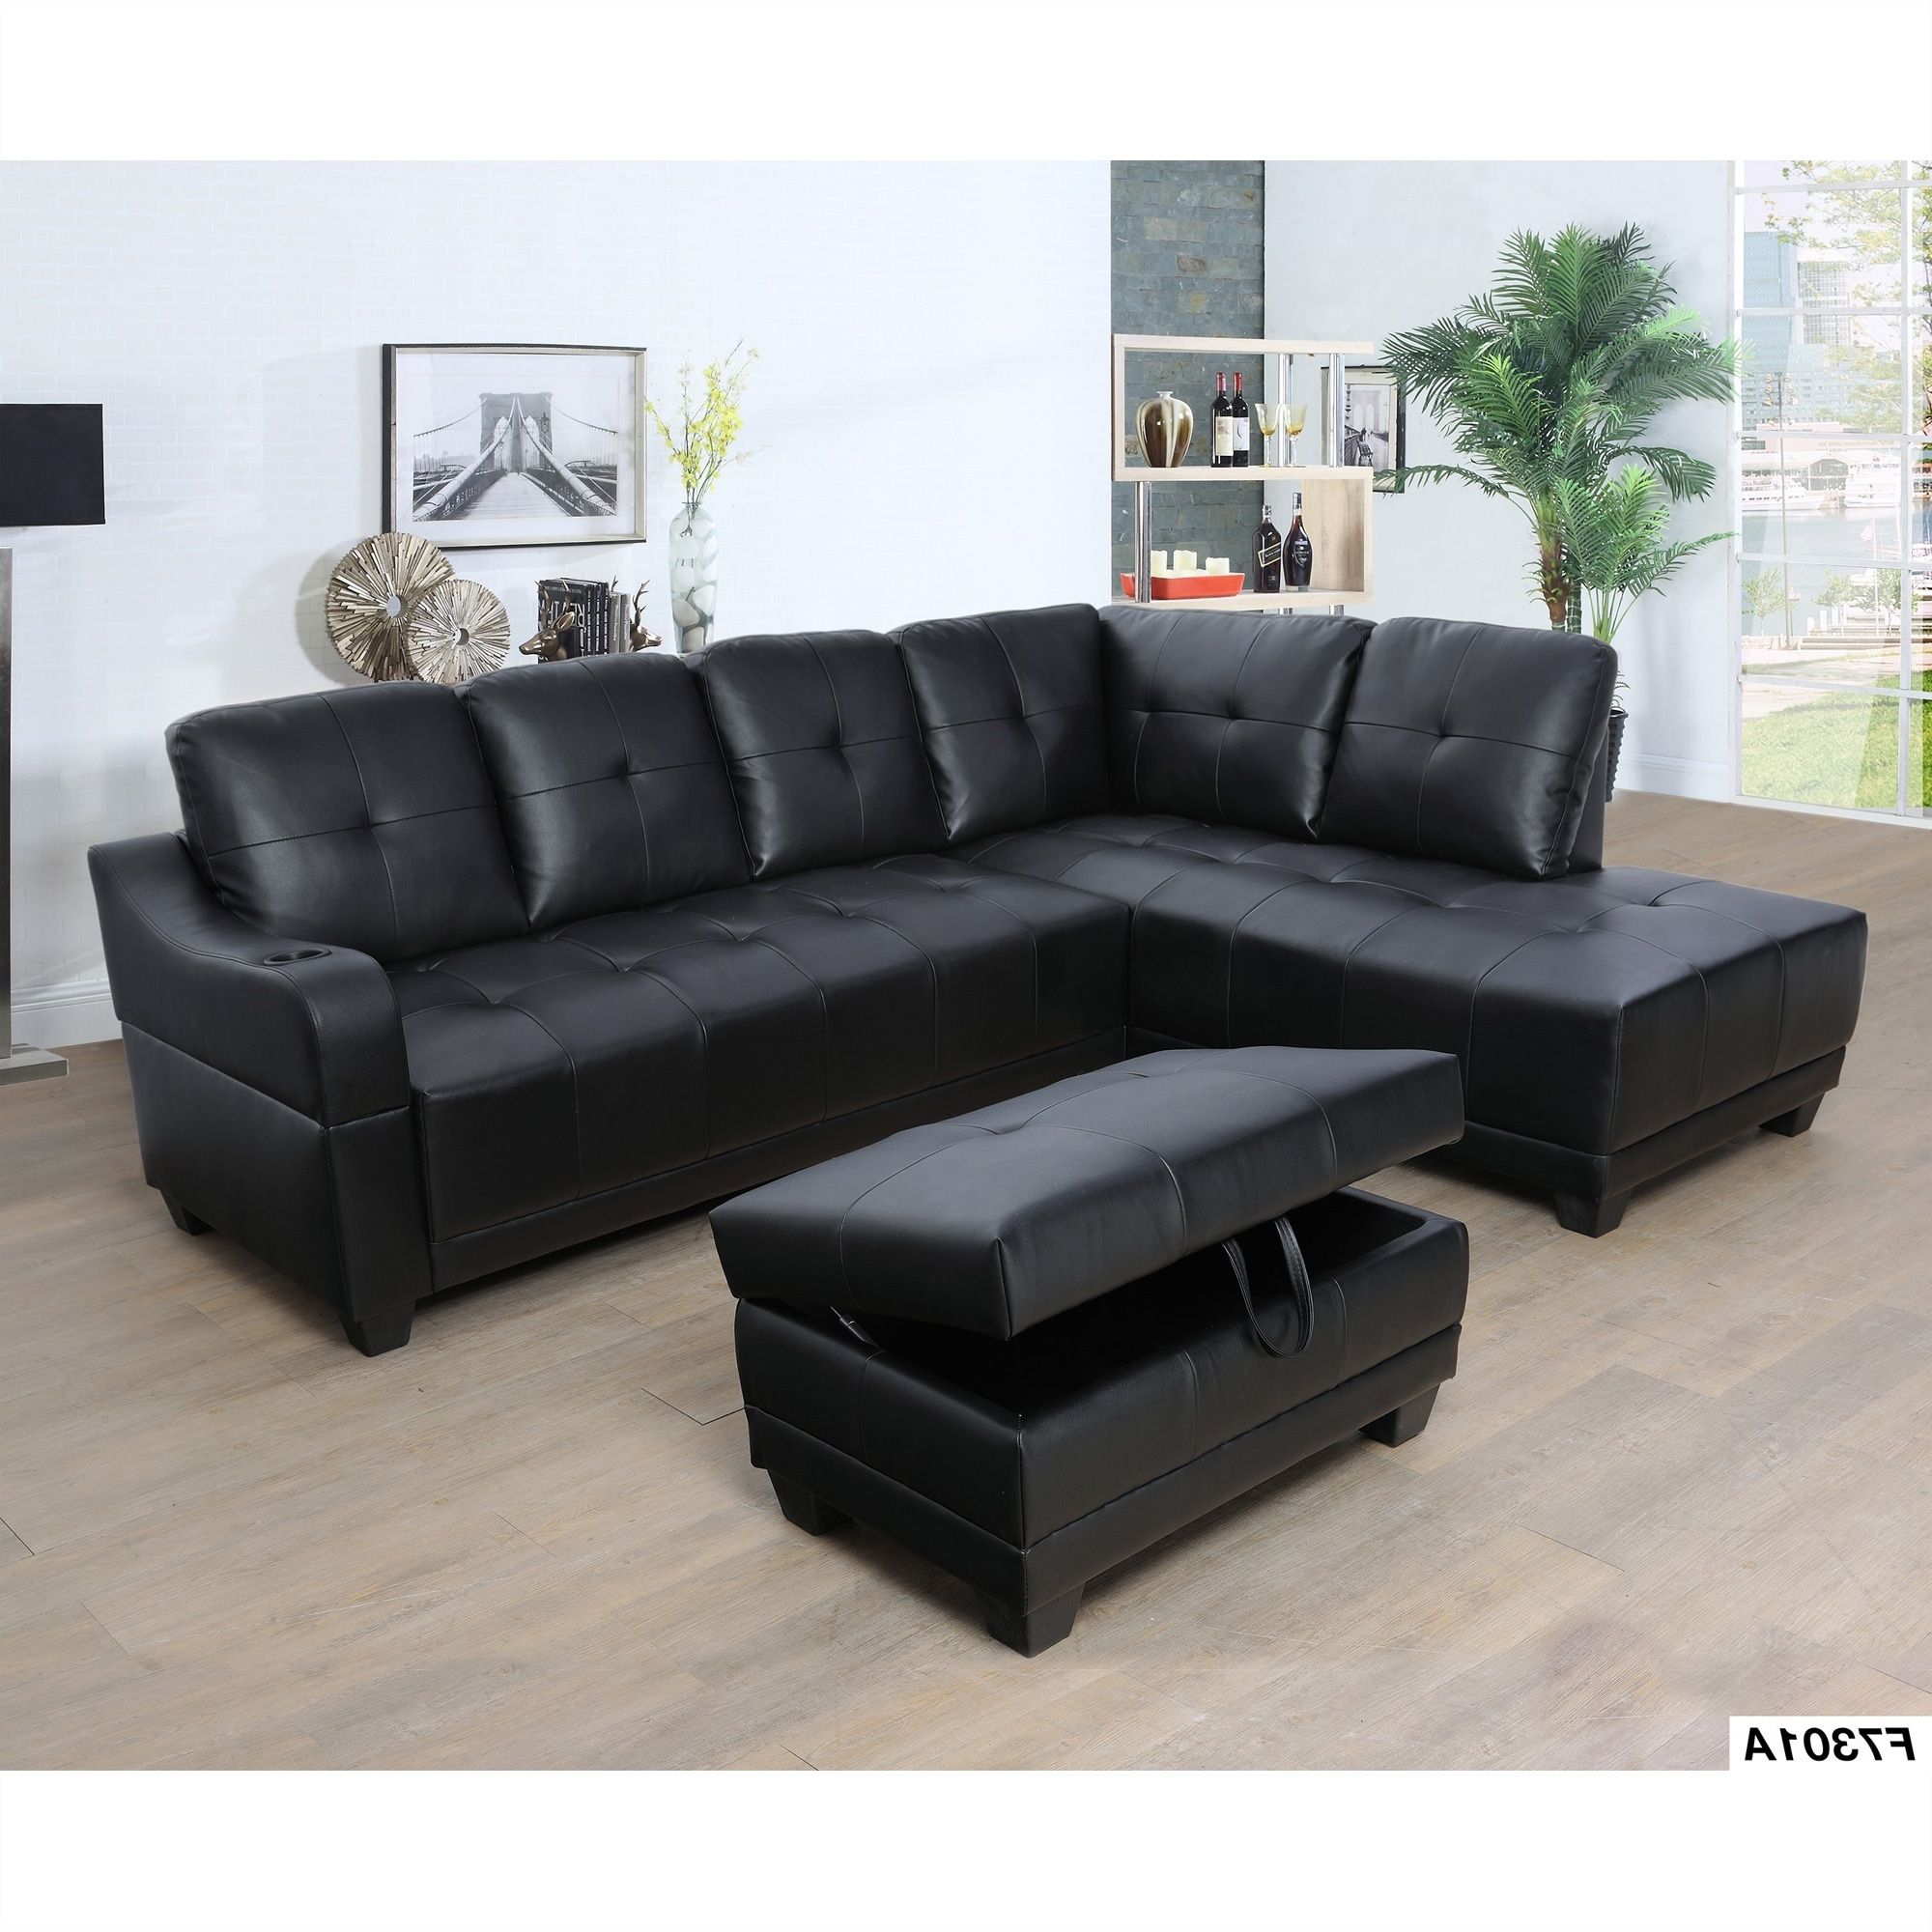 Sectional Sofa Set With Cup Holder,right Facing,black(7301b) – Bed Bath &  Beyond – 33762765 Within Right Facing Black Sofas (View 15 of 15)